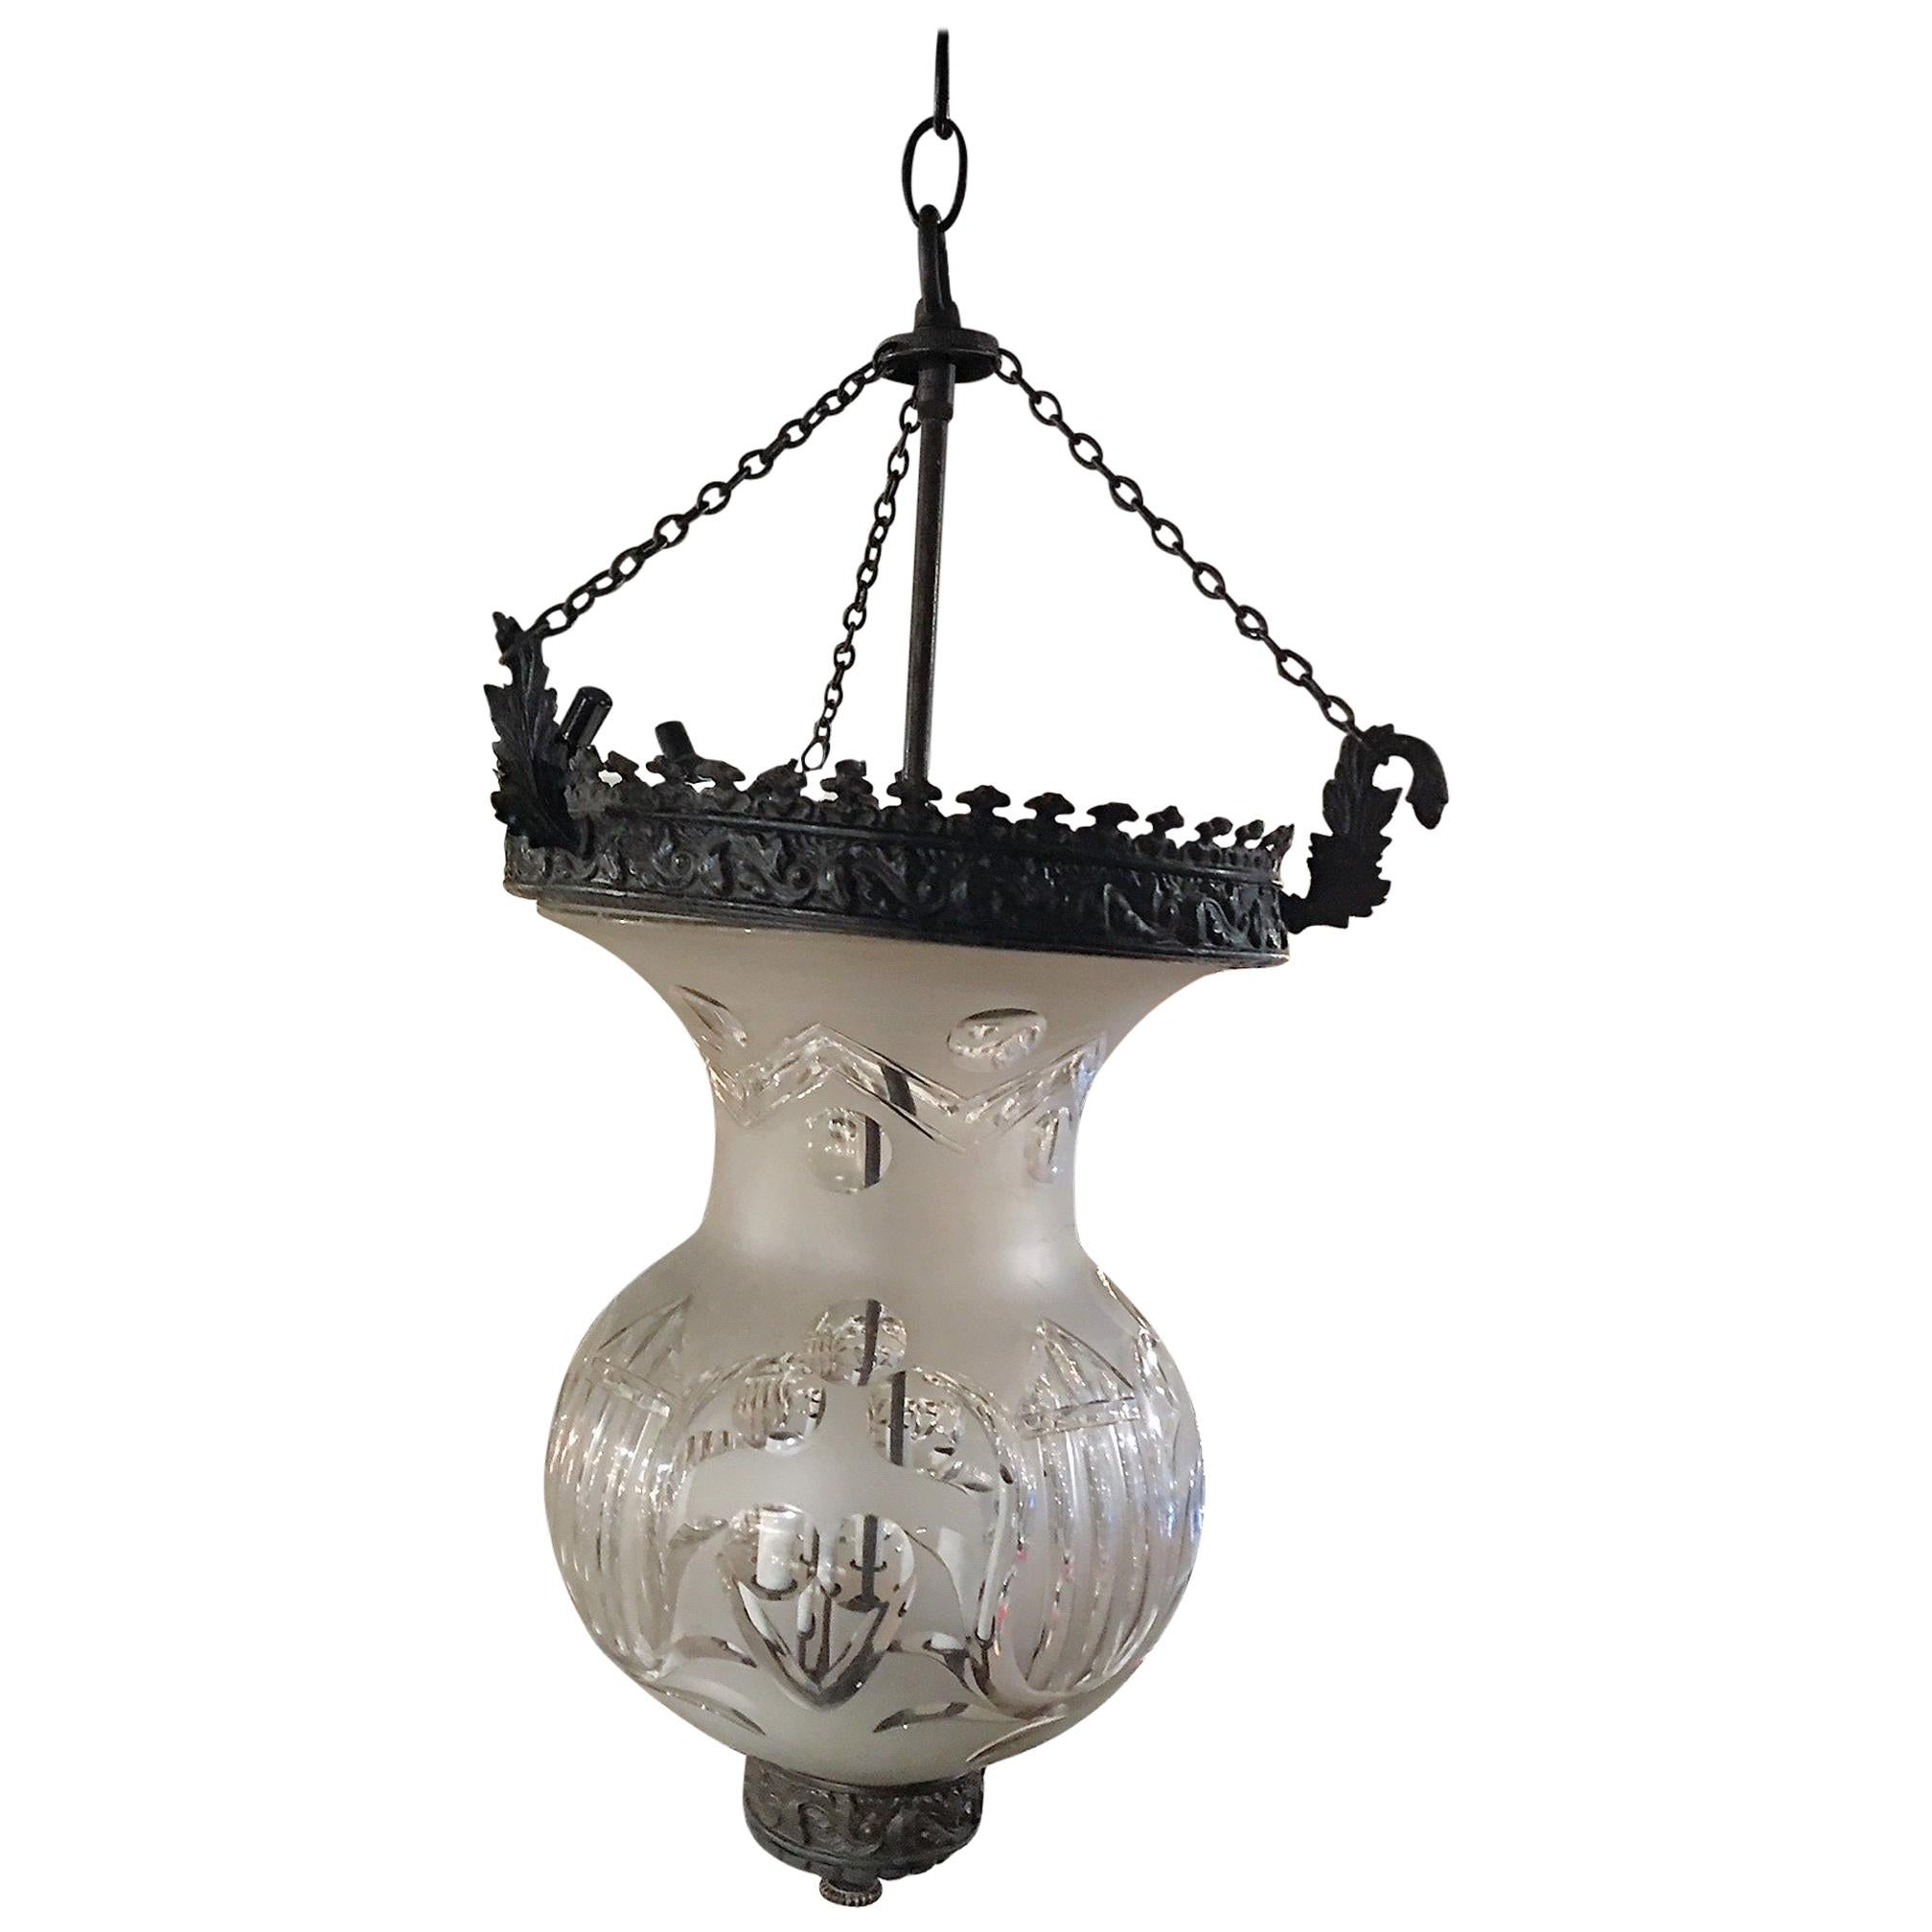 Smoked Bell Lantern with Oxidized Finish and Frosted Glass, 20th Century